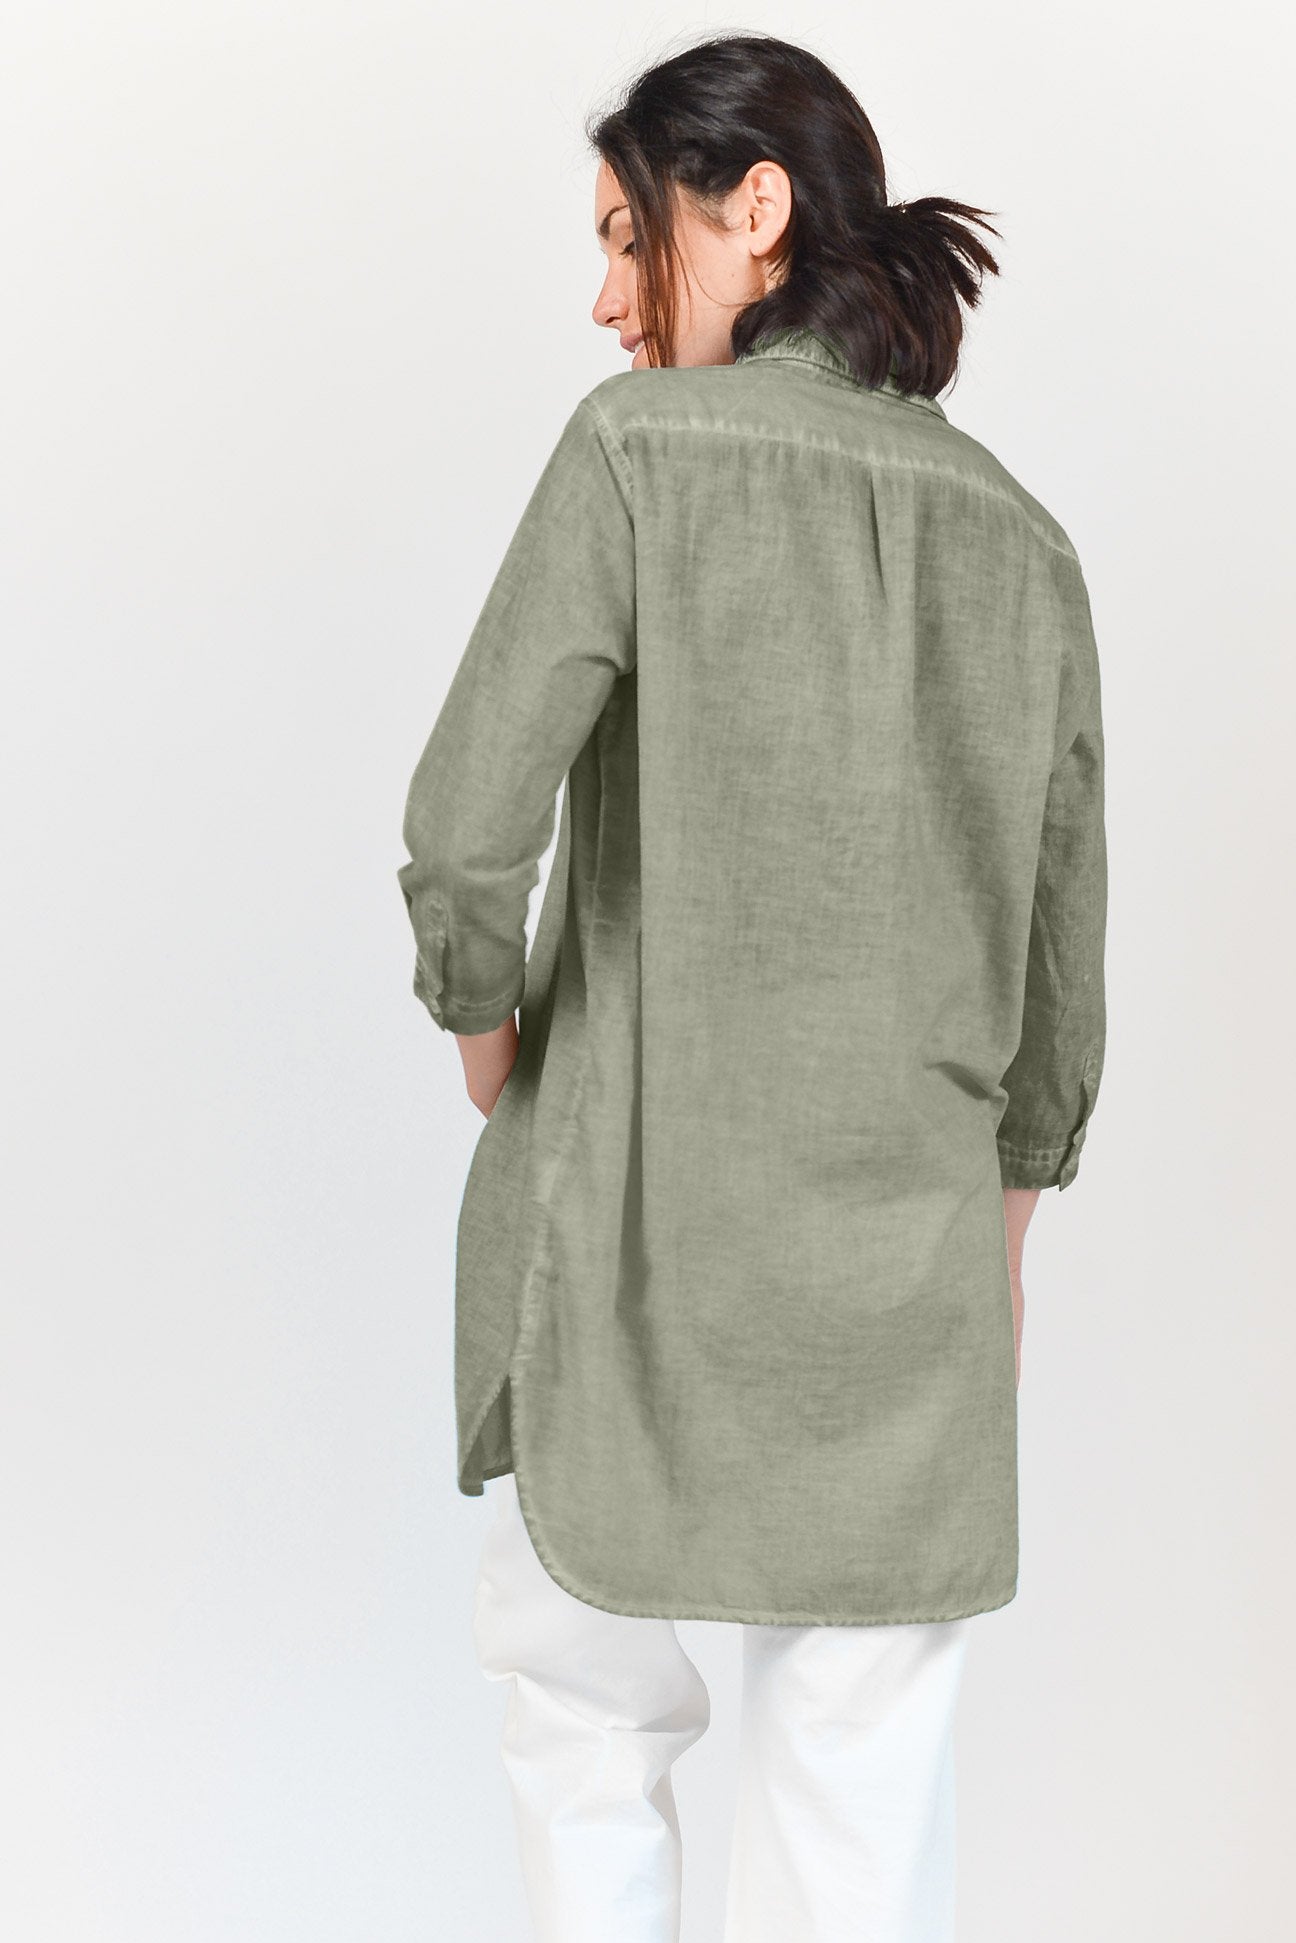 Effortless Voile Open Tunic - Willy’s - Shirtdress